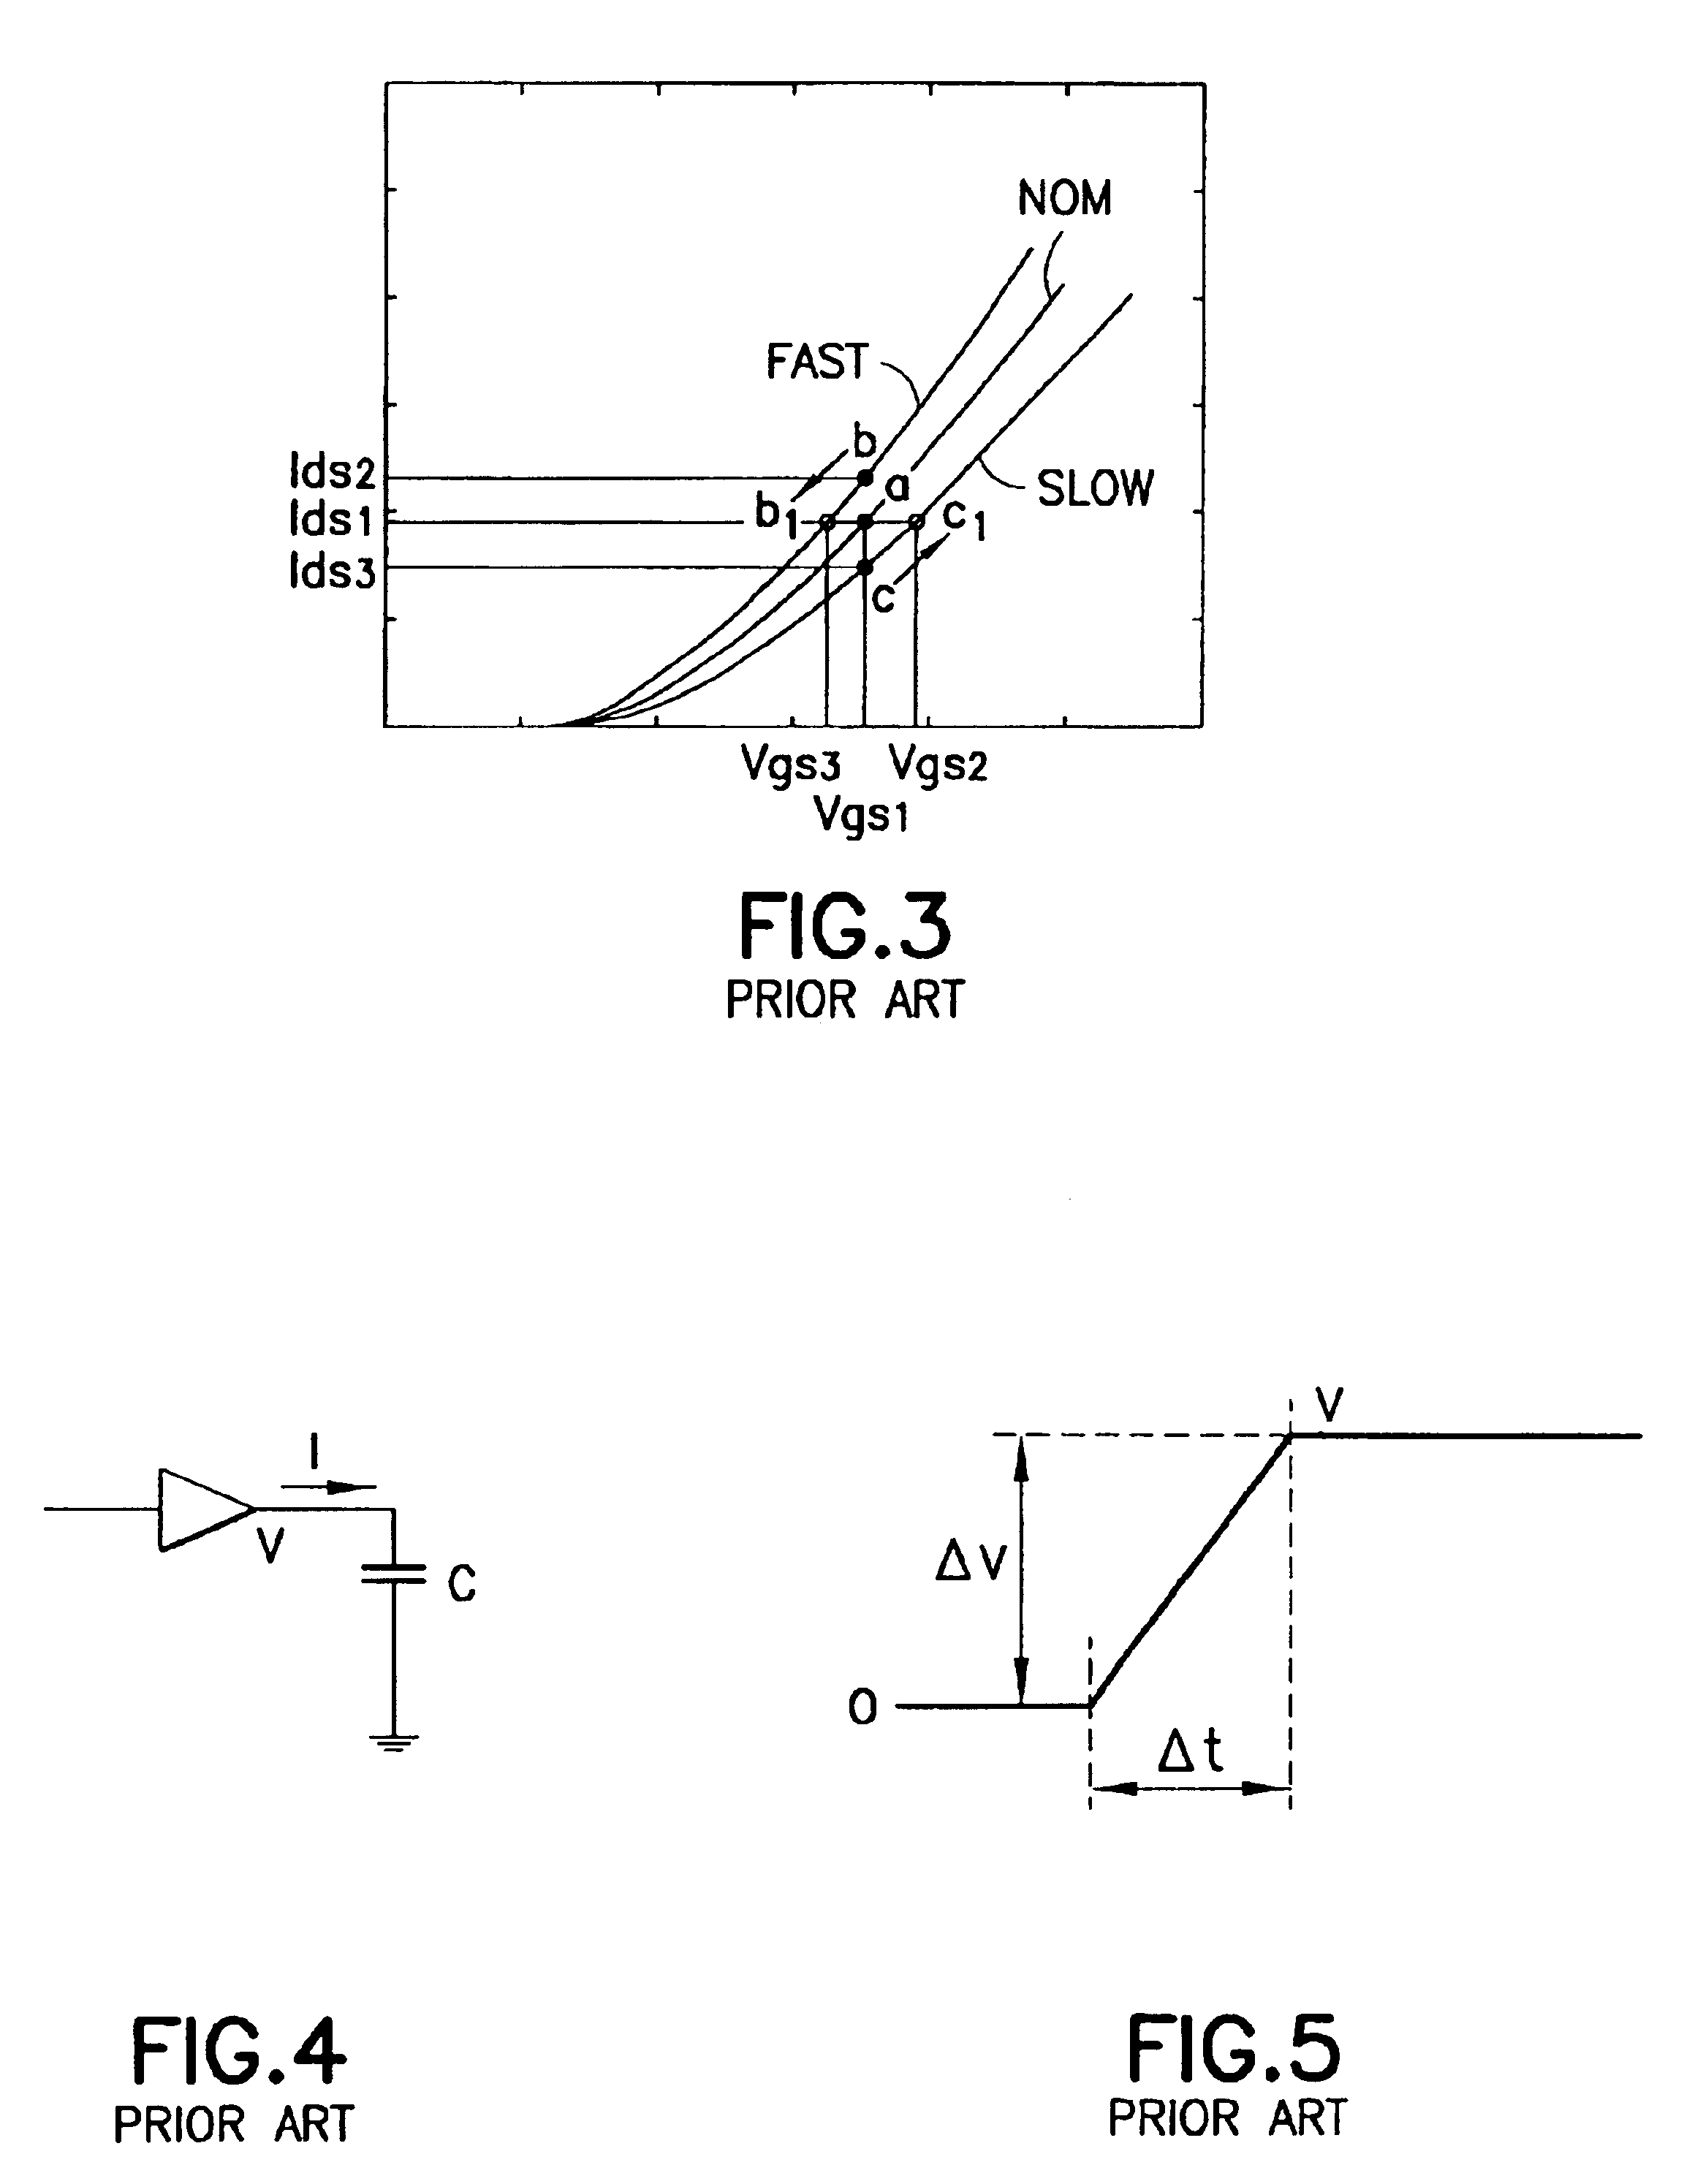 Ultrasound transmitter with voltage-controlled rise/fall time variation